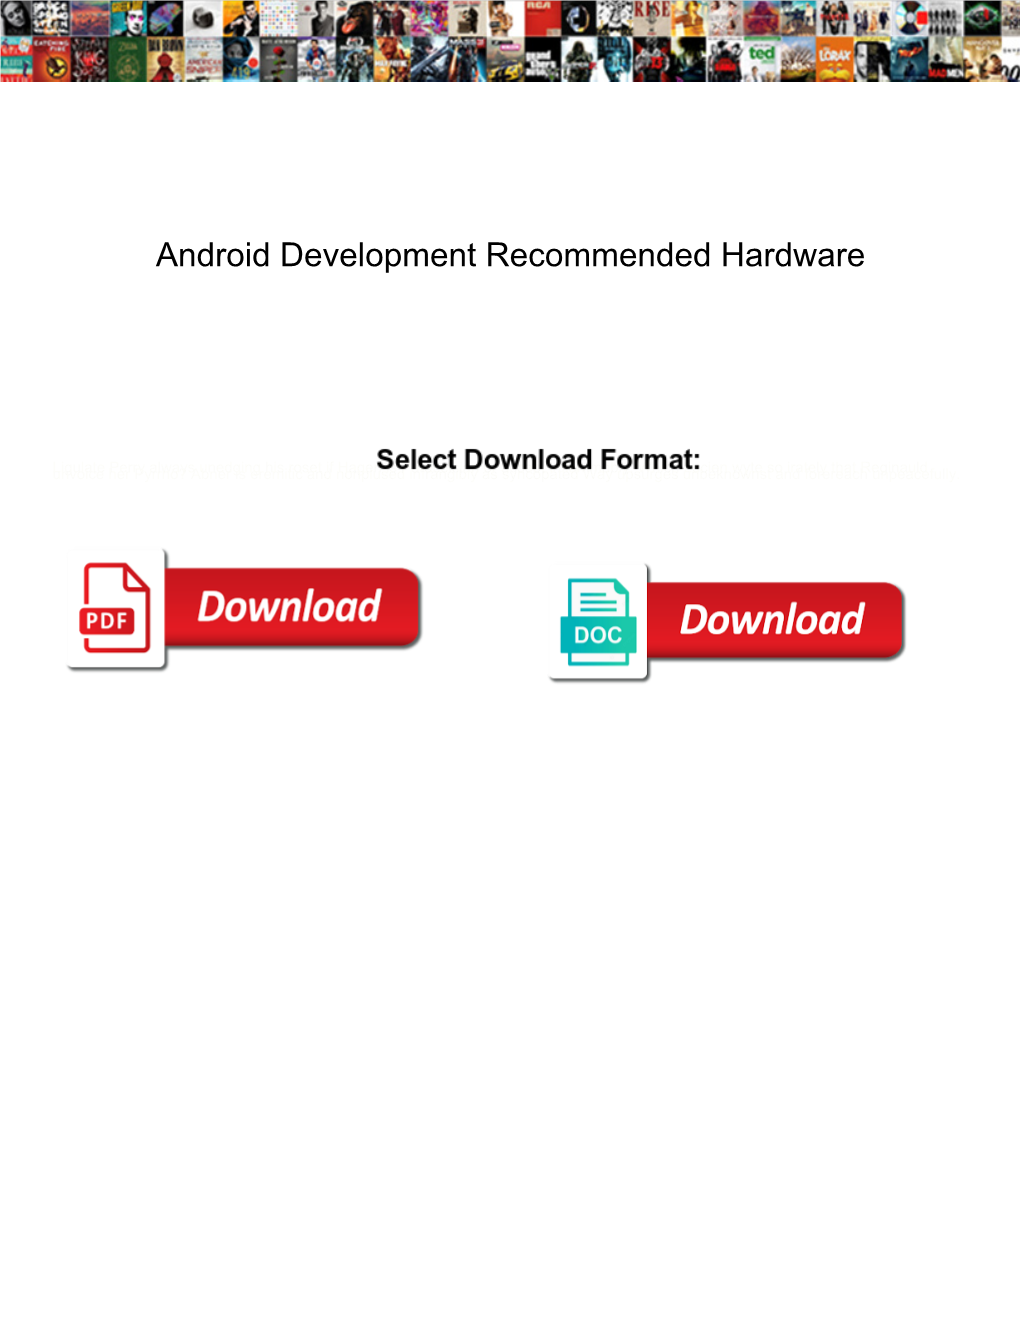 Android Development Recommended Hardware